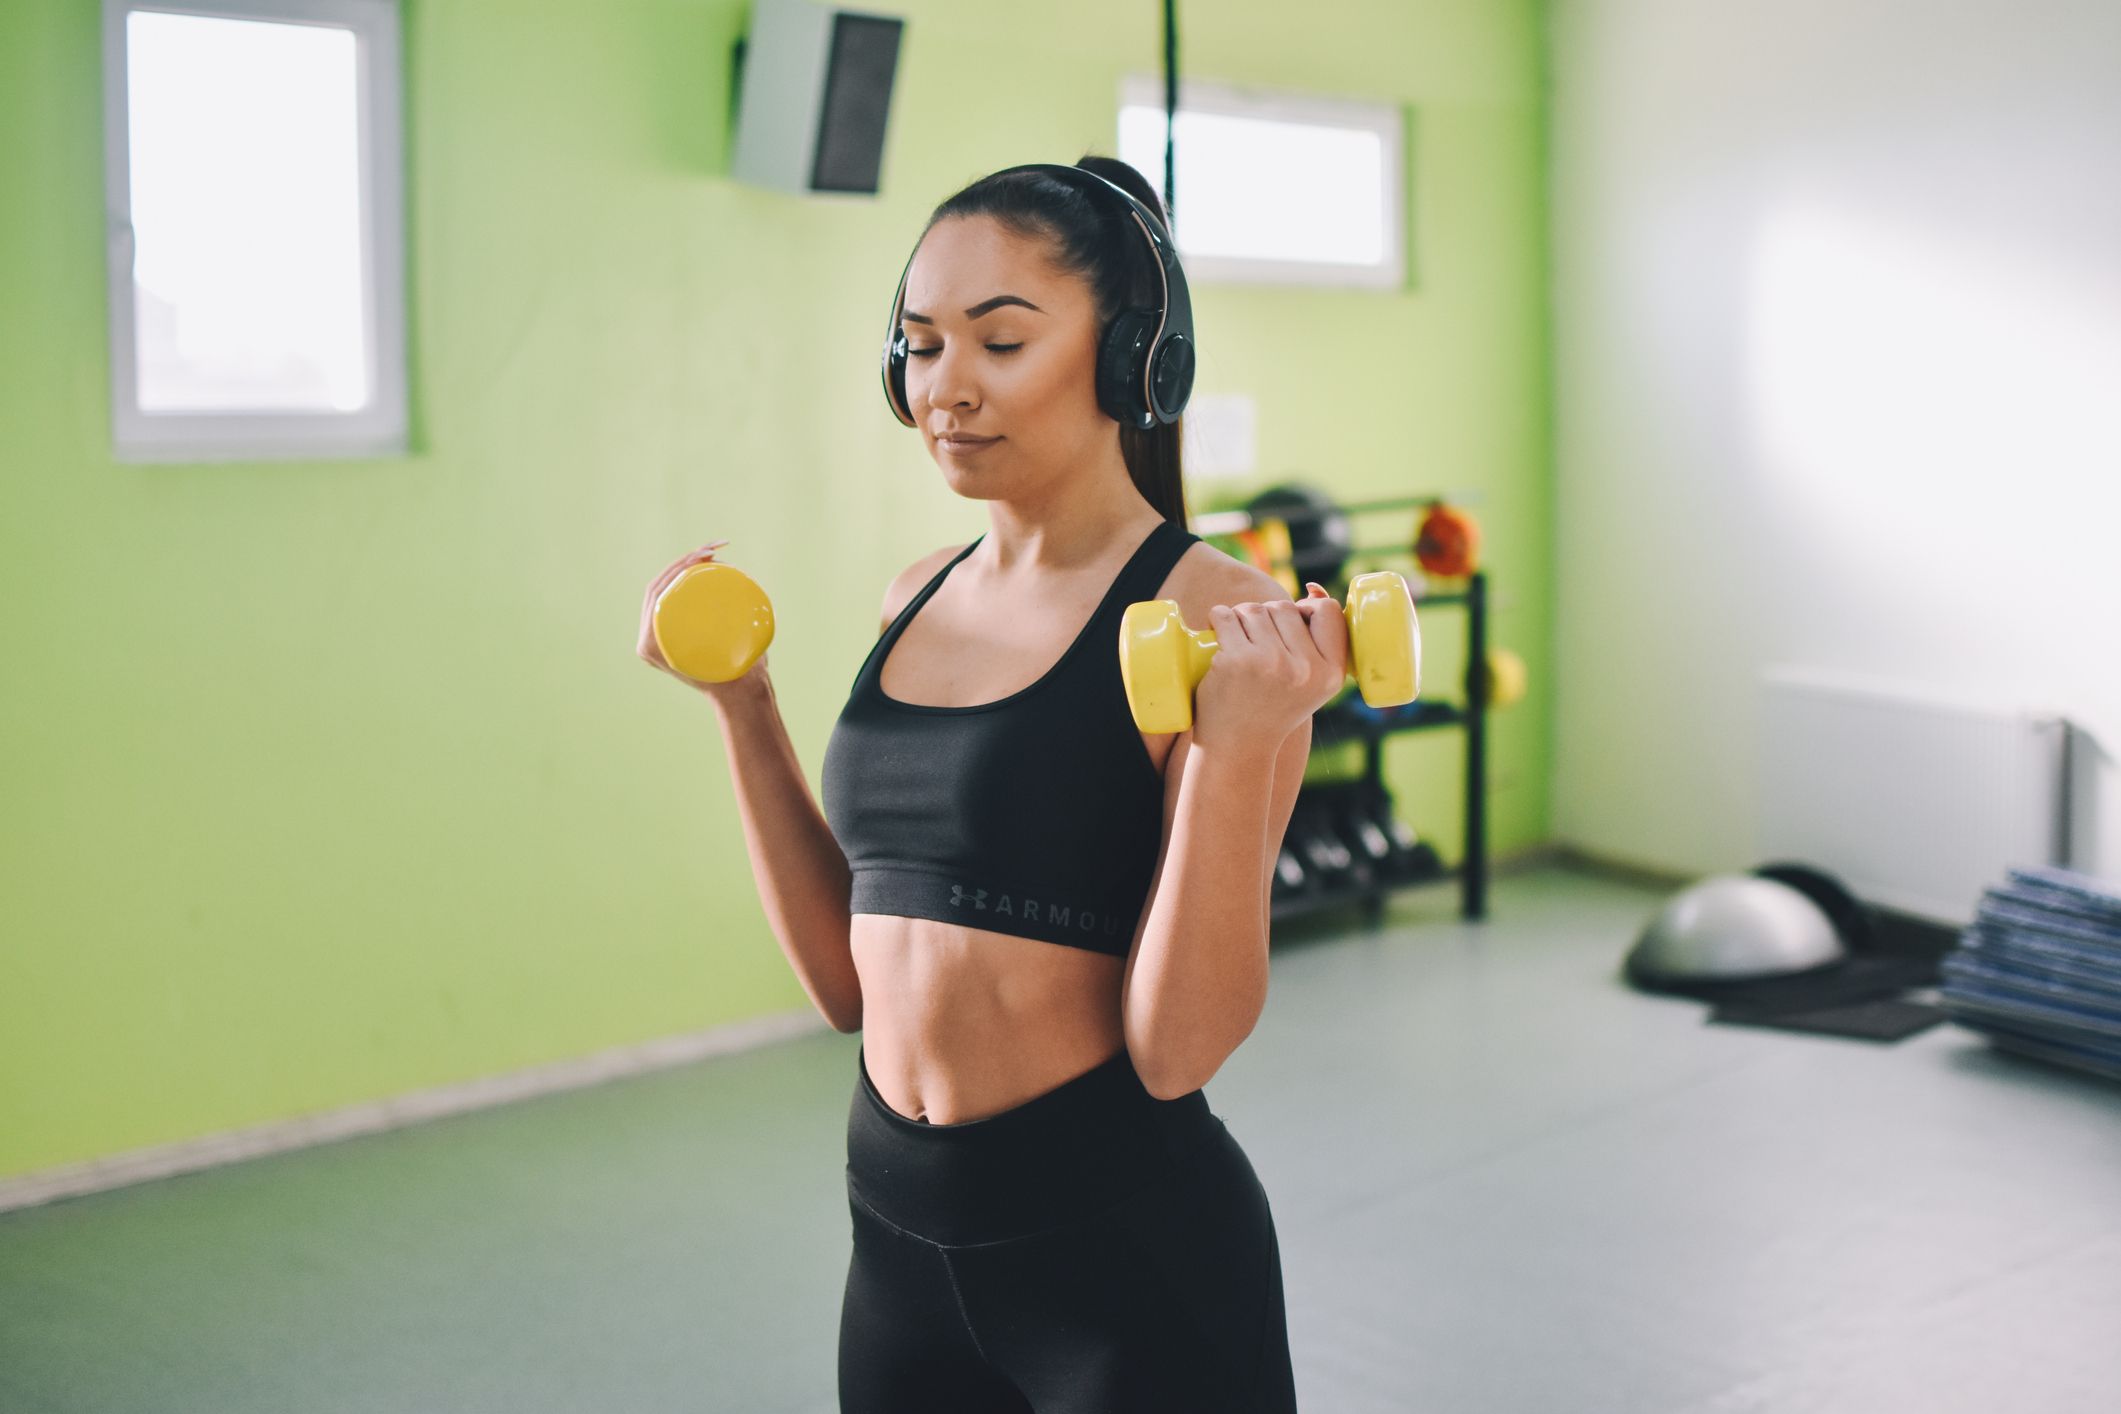 49 Best Workout Apps 2020 | Exercise Apps for Women Who Want Results